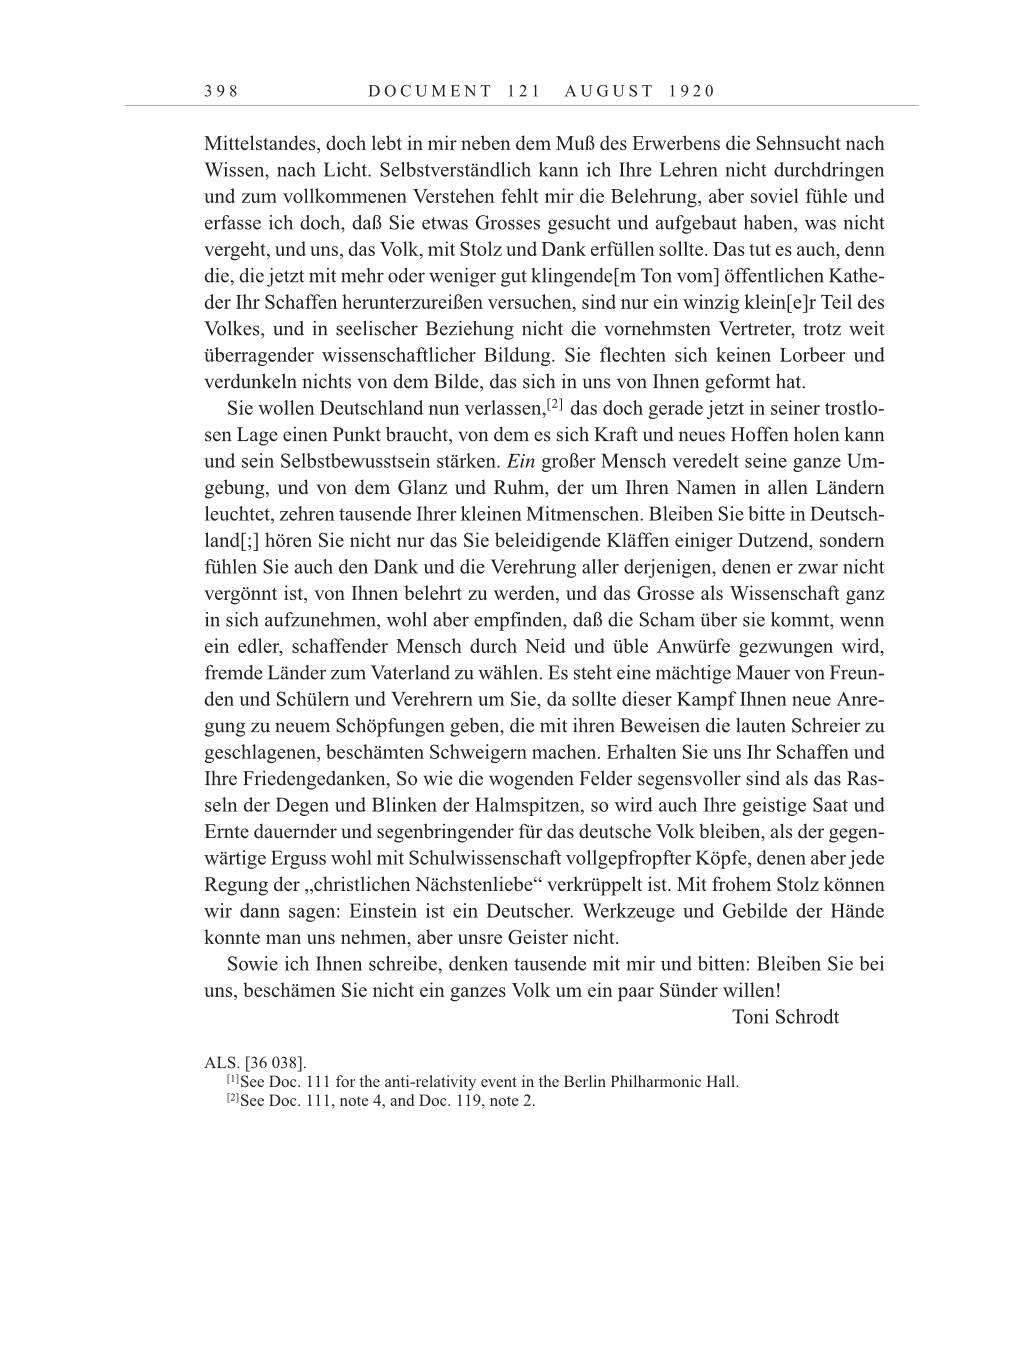 Volume 10: The Berlin Years: Correspondence May-December 1920 / Supplementary Correspondence 1909-1920 page 398